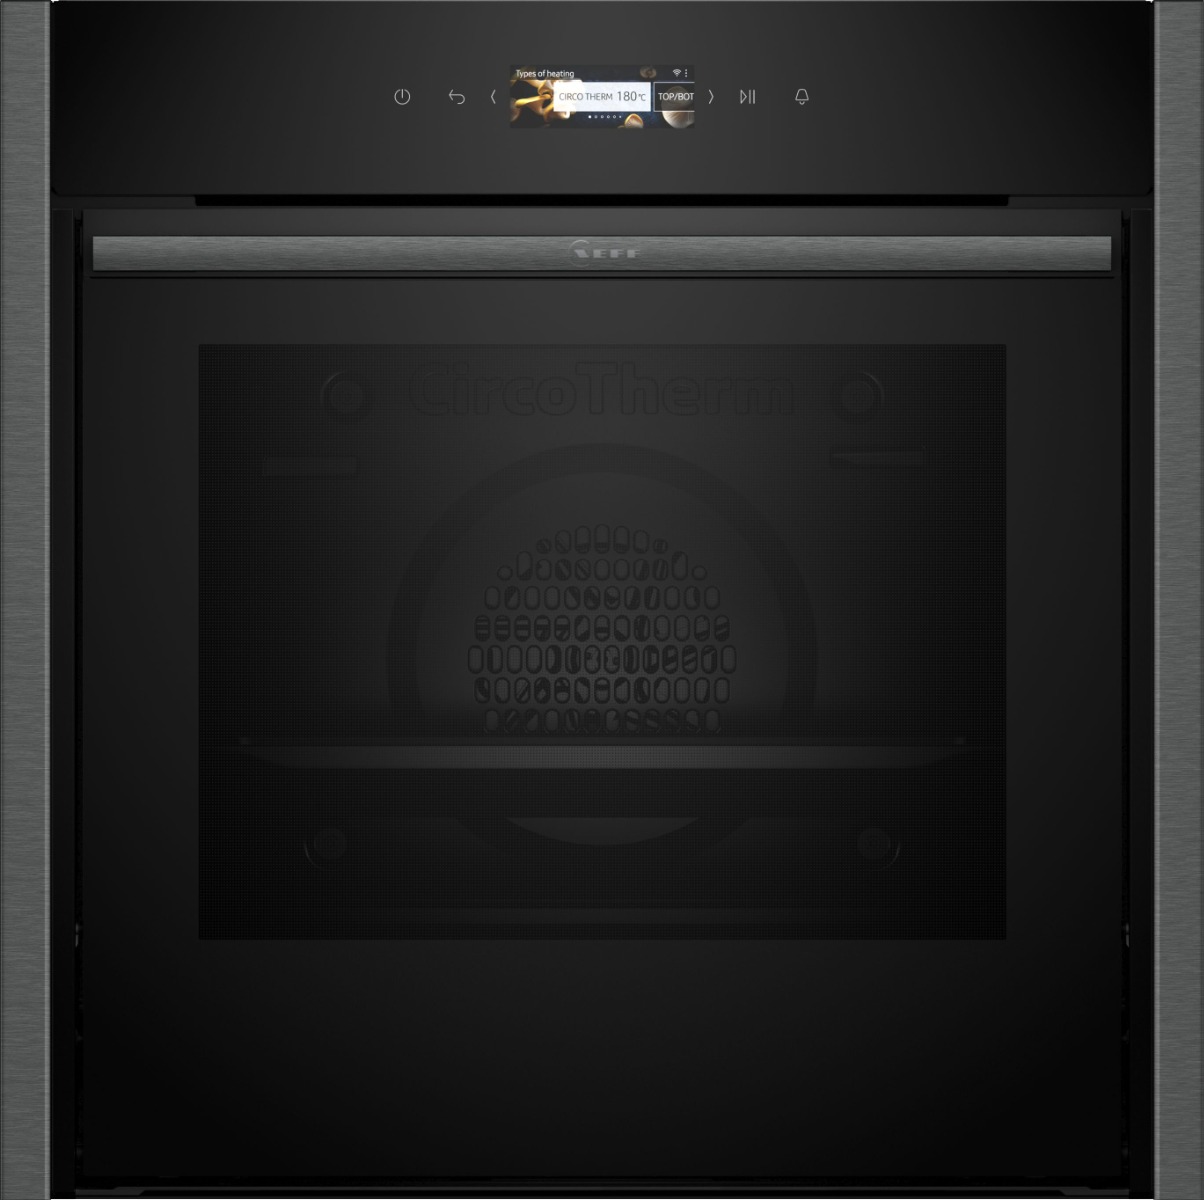 Neff B54CR31G0B Built-In Slide and Hide Single Oven - Black with Graphite-Grey Trim